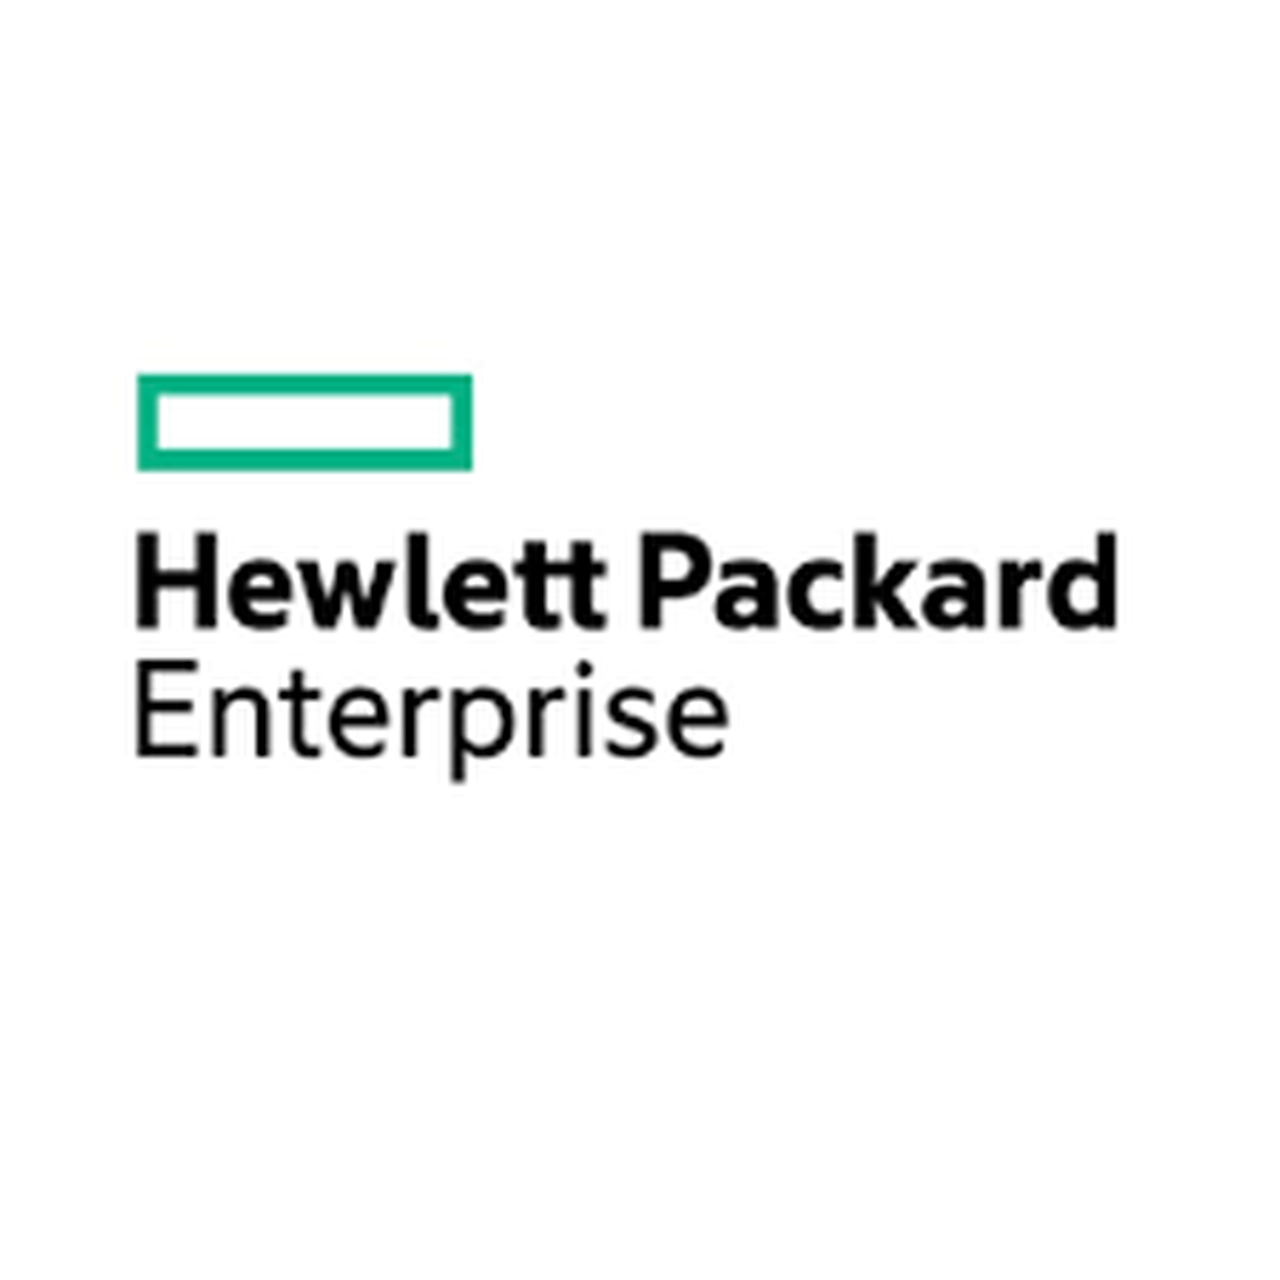 HPE 2 Years Post Warranty Foundation Care, Next Business Day wDMR BL460c G7 Service